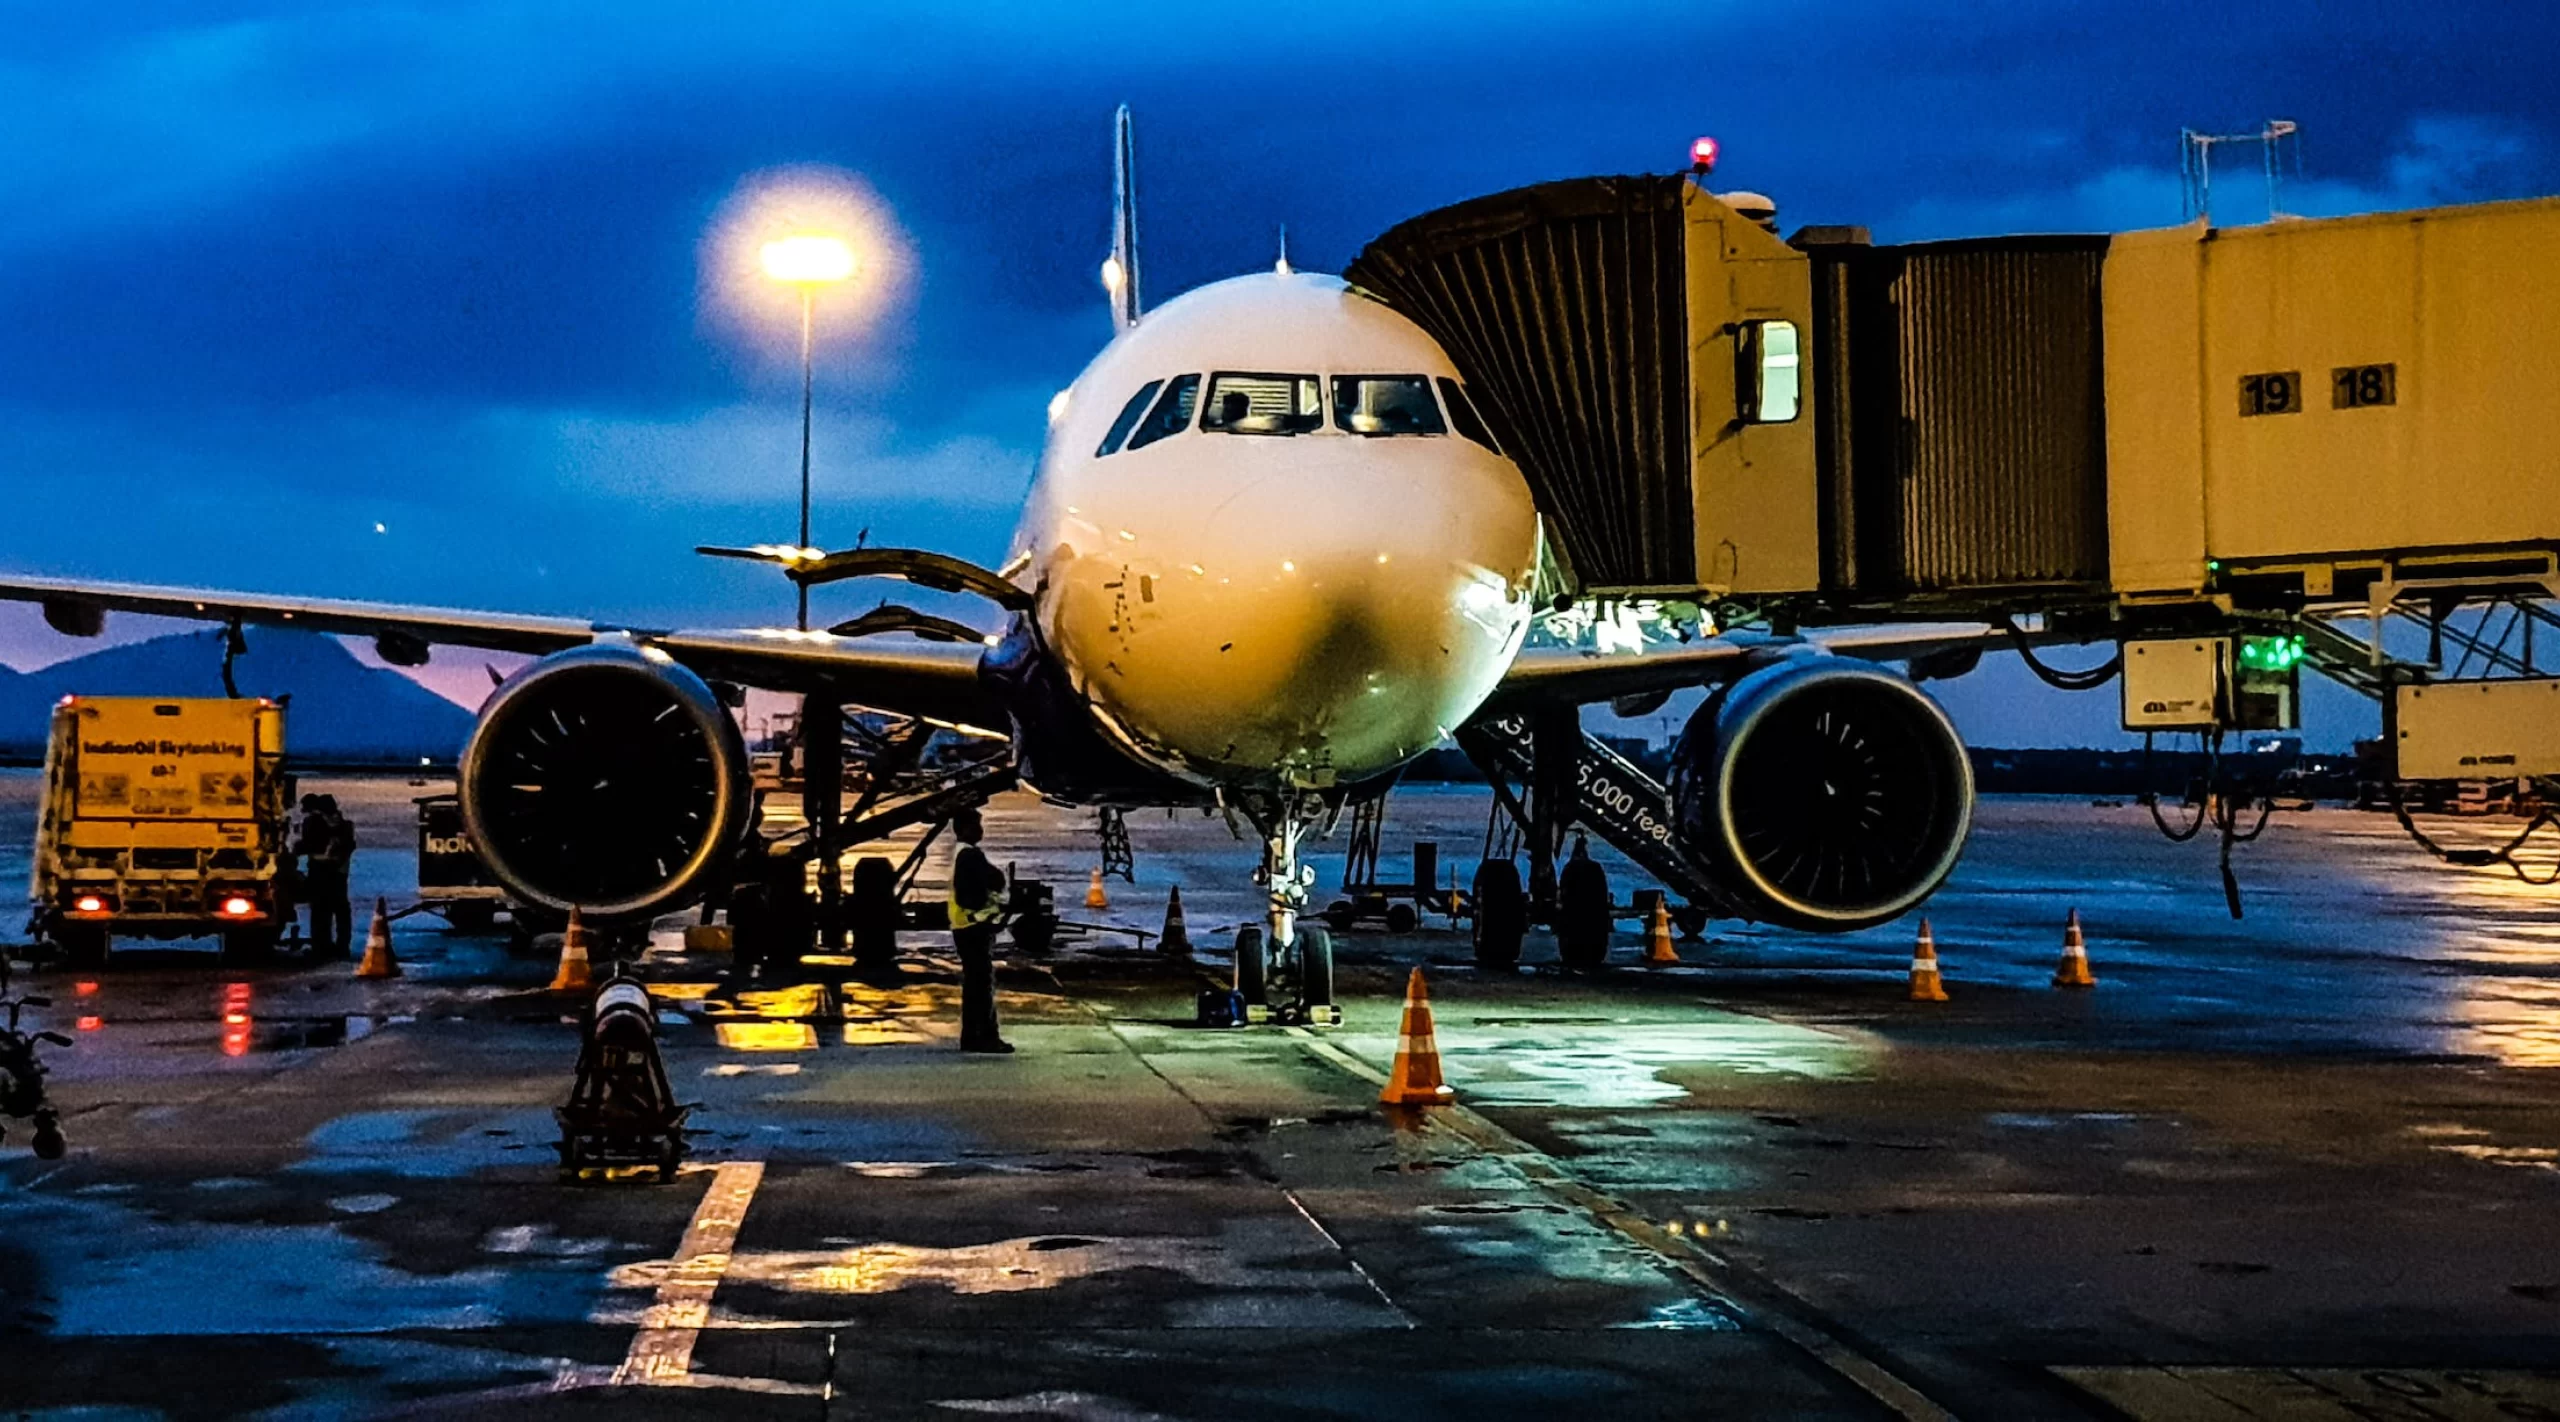 An international cargo plane is parked on the tarmac at night.